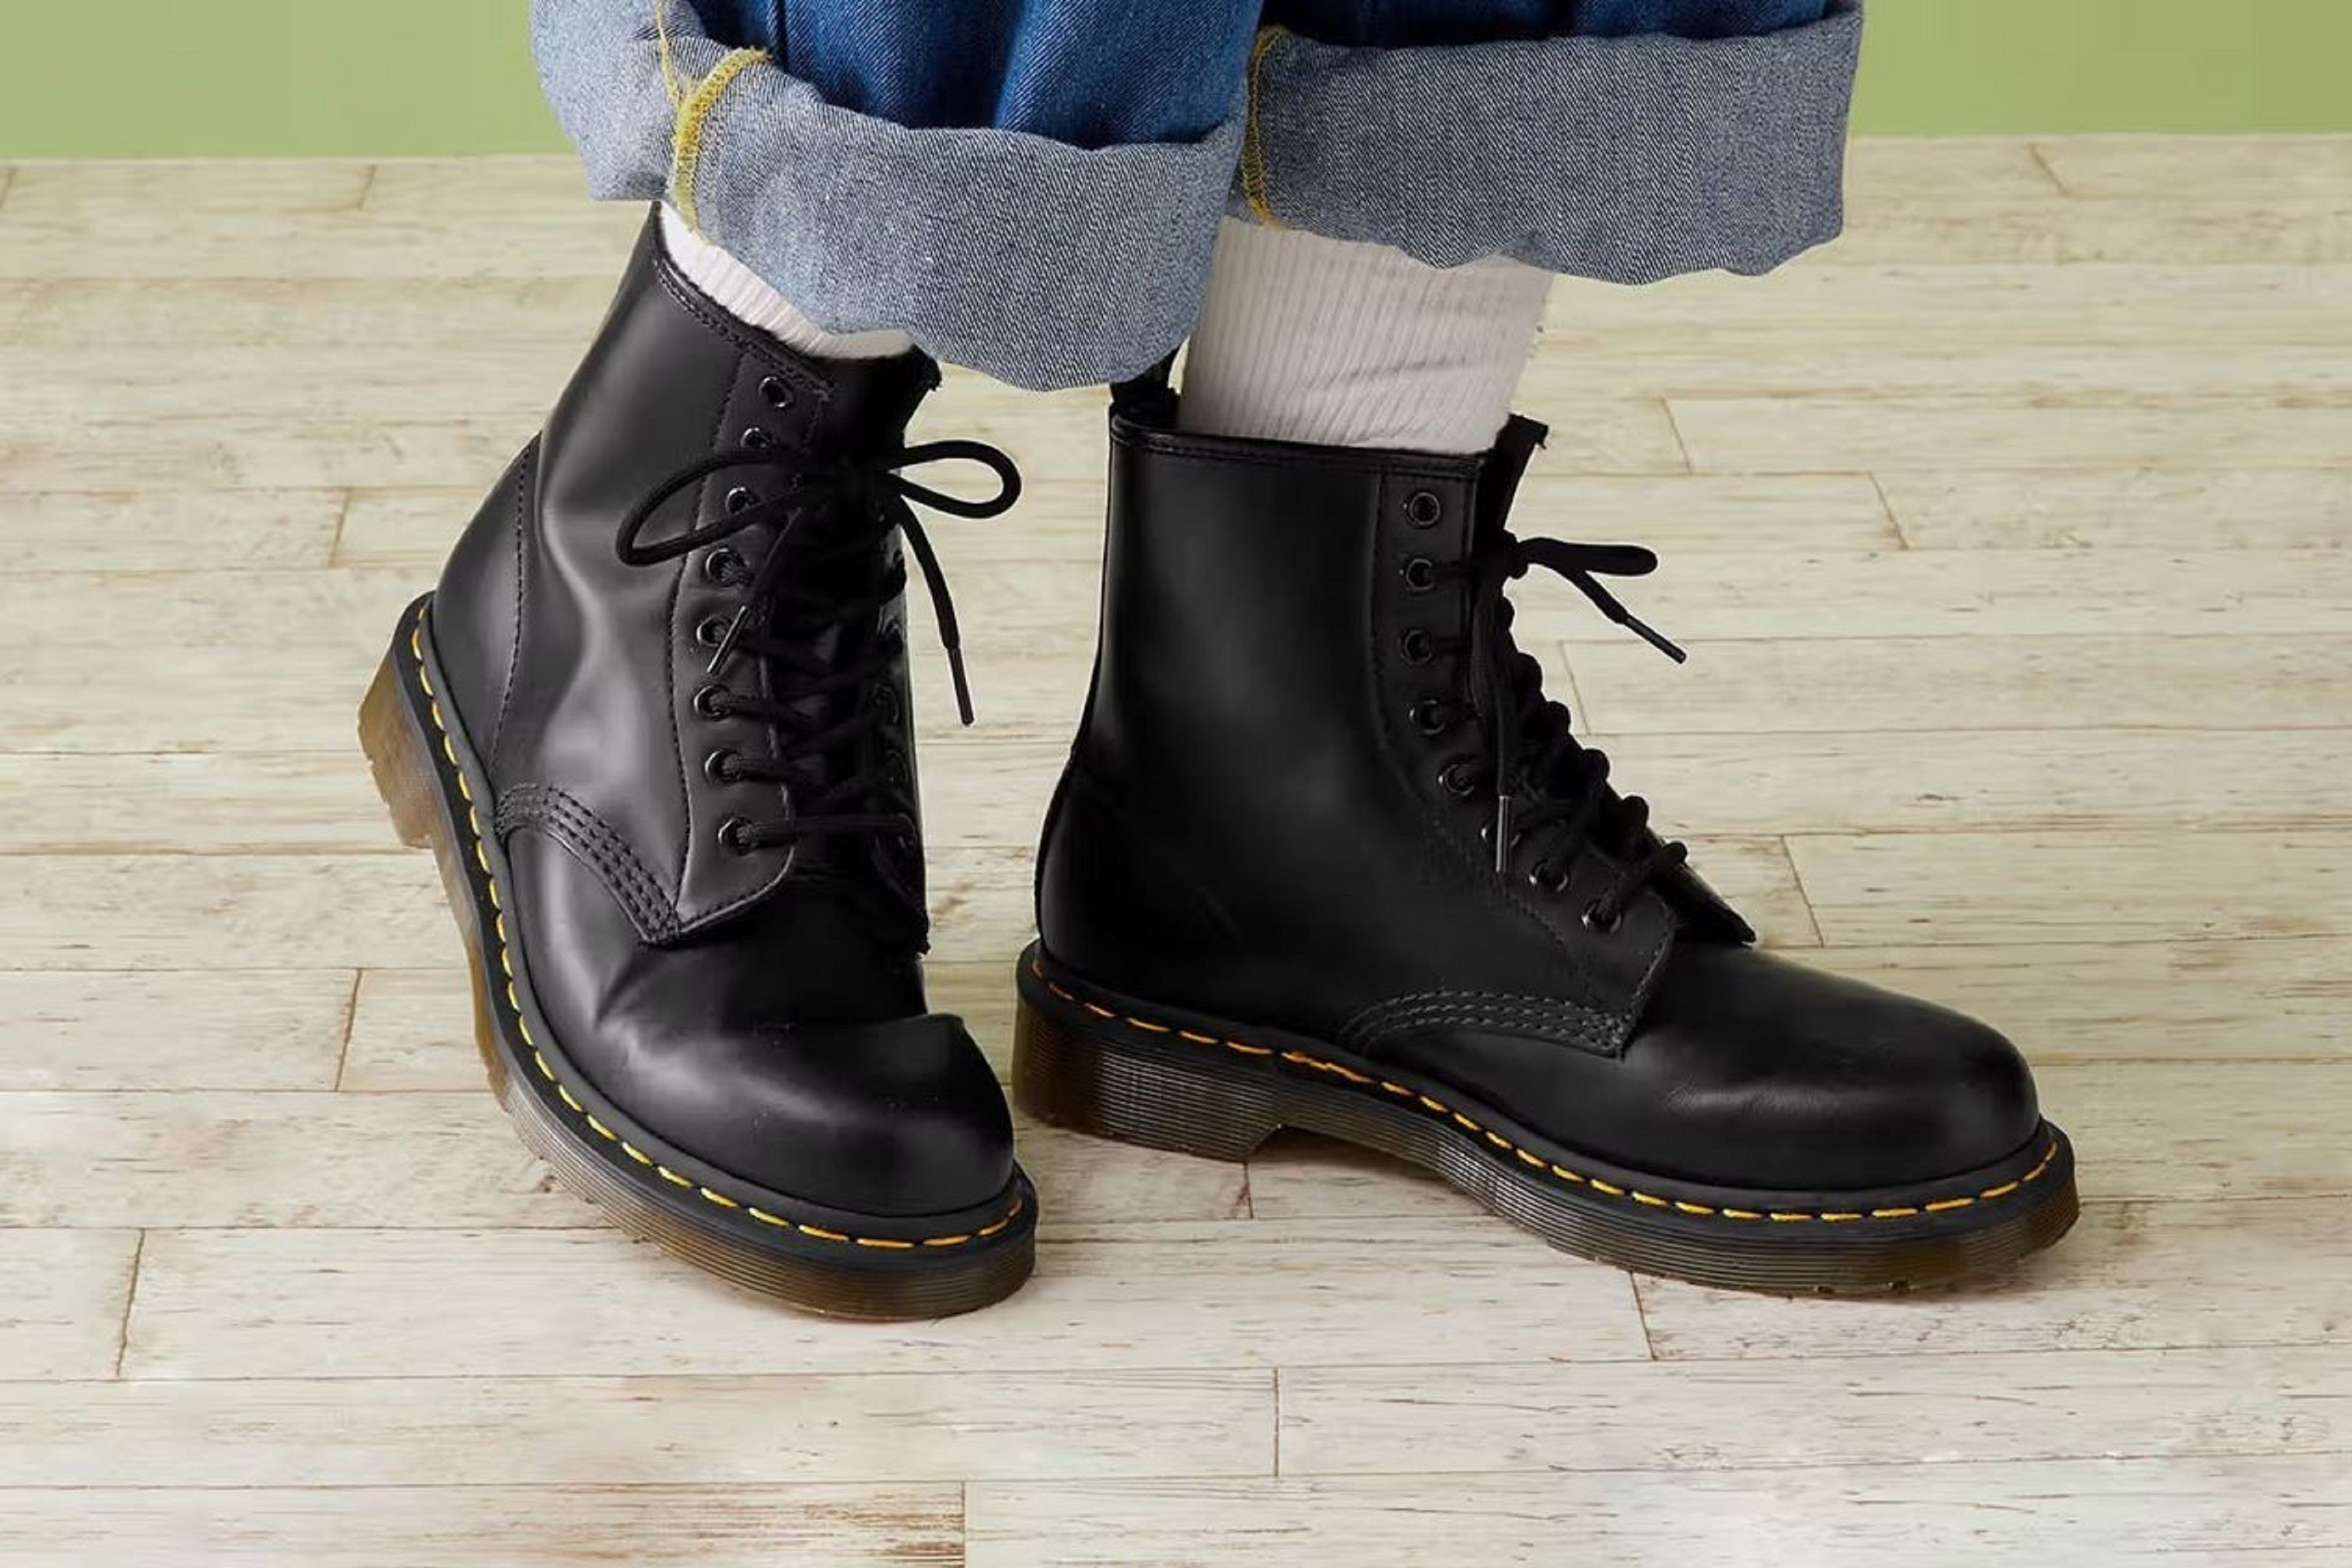 Story Behind Dr. Martens 1460 Boots